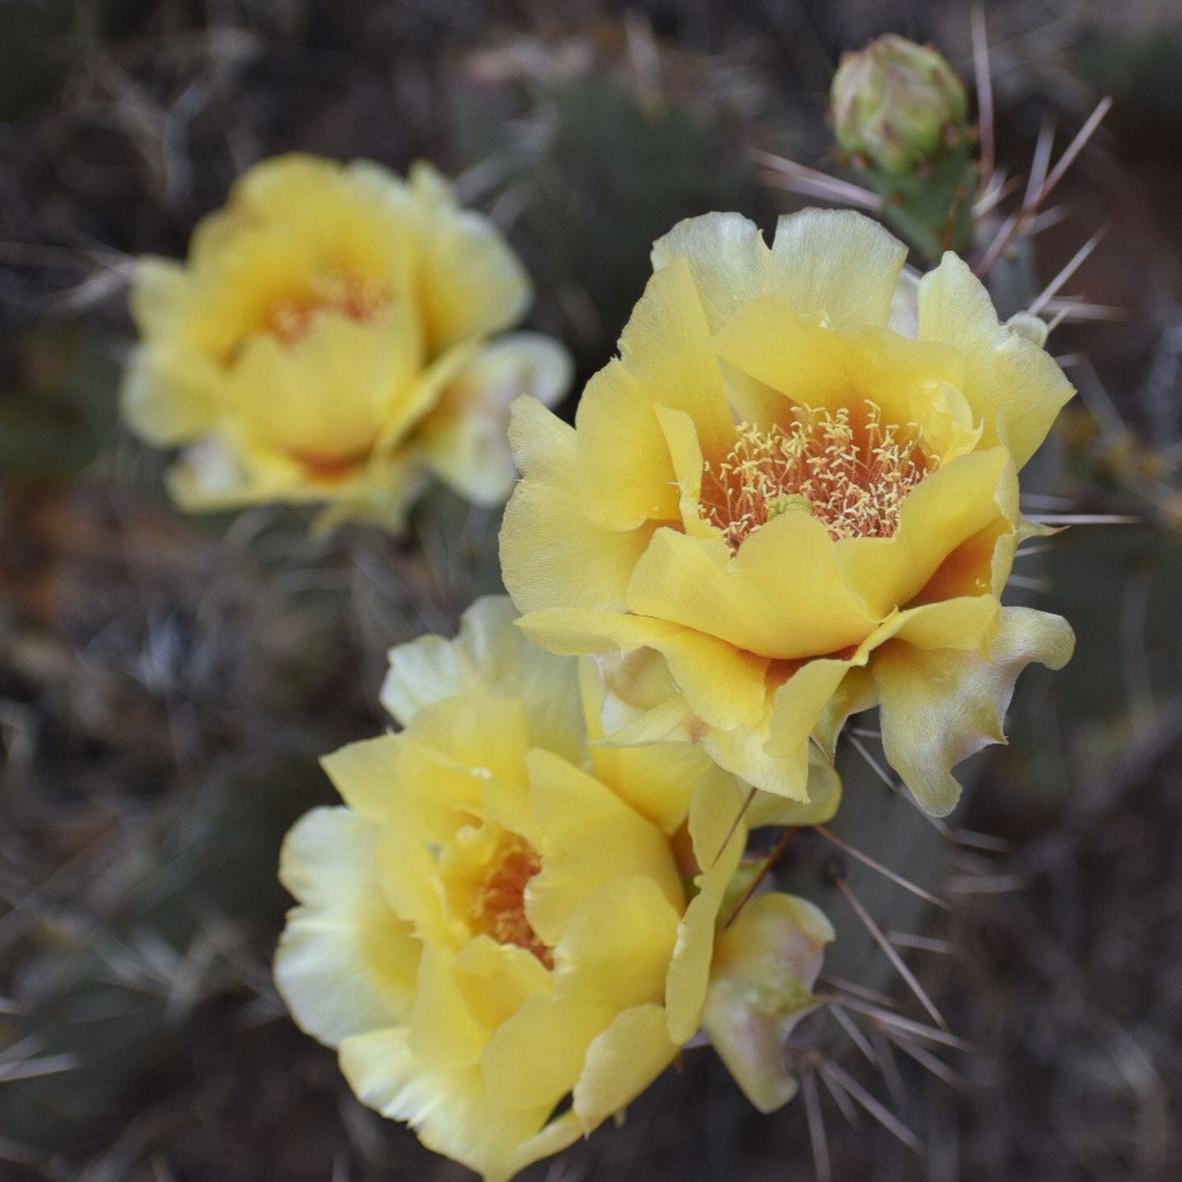 Today is the first day of spring and we couldn't be more excited. The temperatures are warming up, the birds are chirping, and lots of precipitation this winter has us dreaming of all the beautiful desert blooms that will be here soon. 

#FindYourPark #EncuentraTuParque